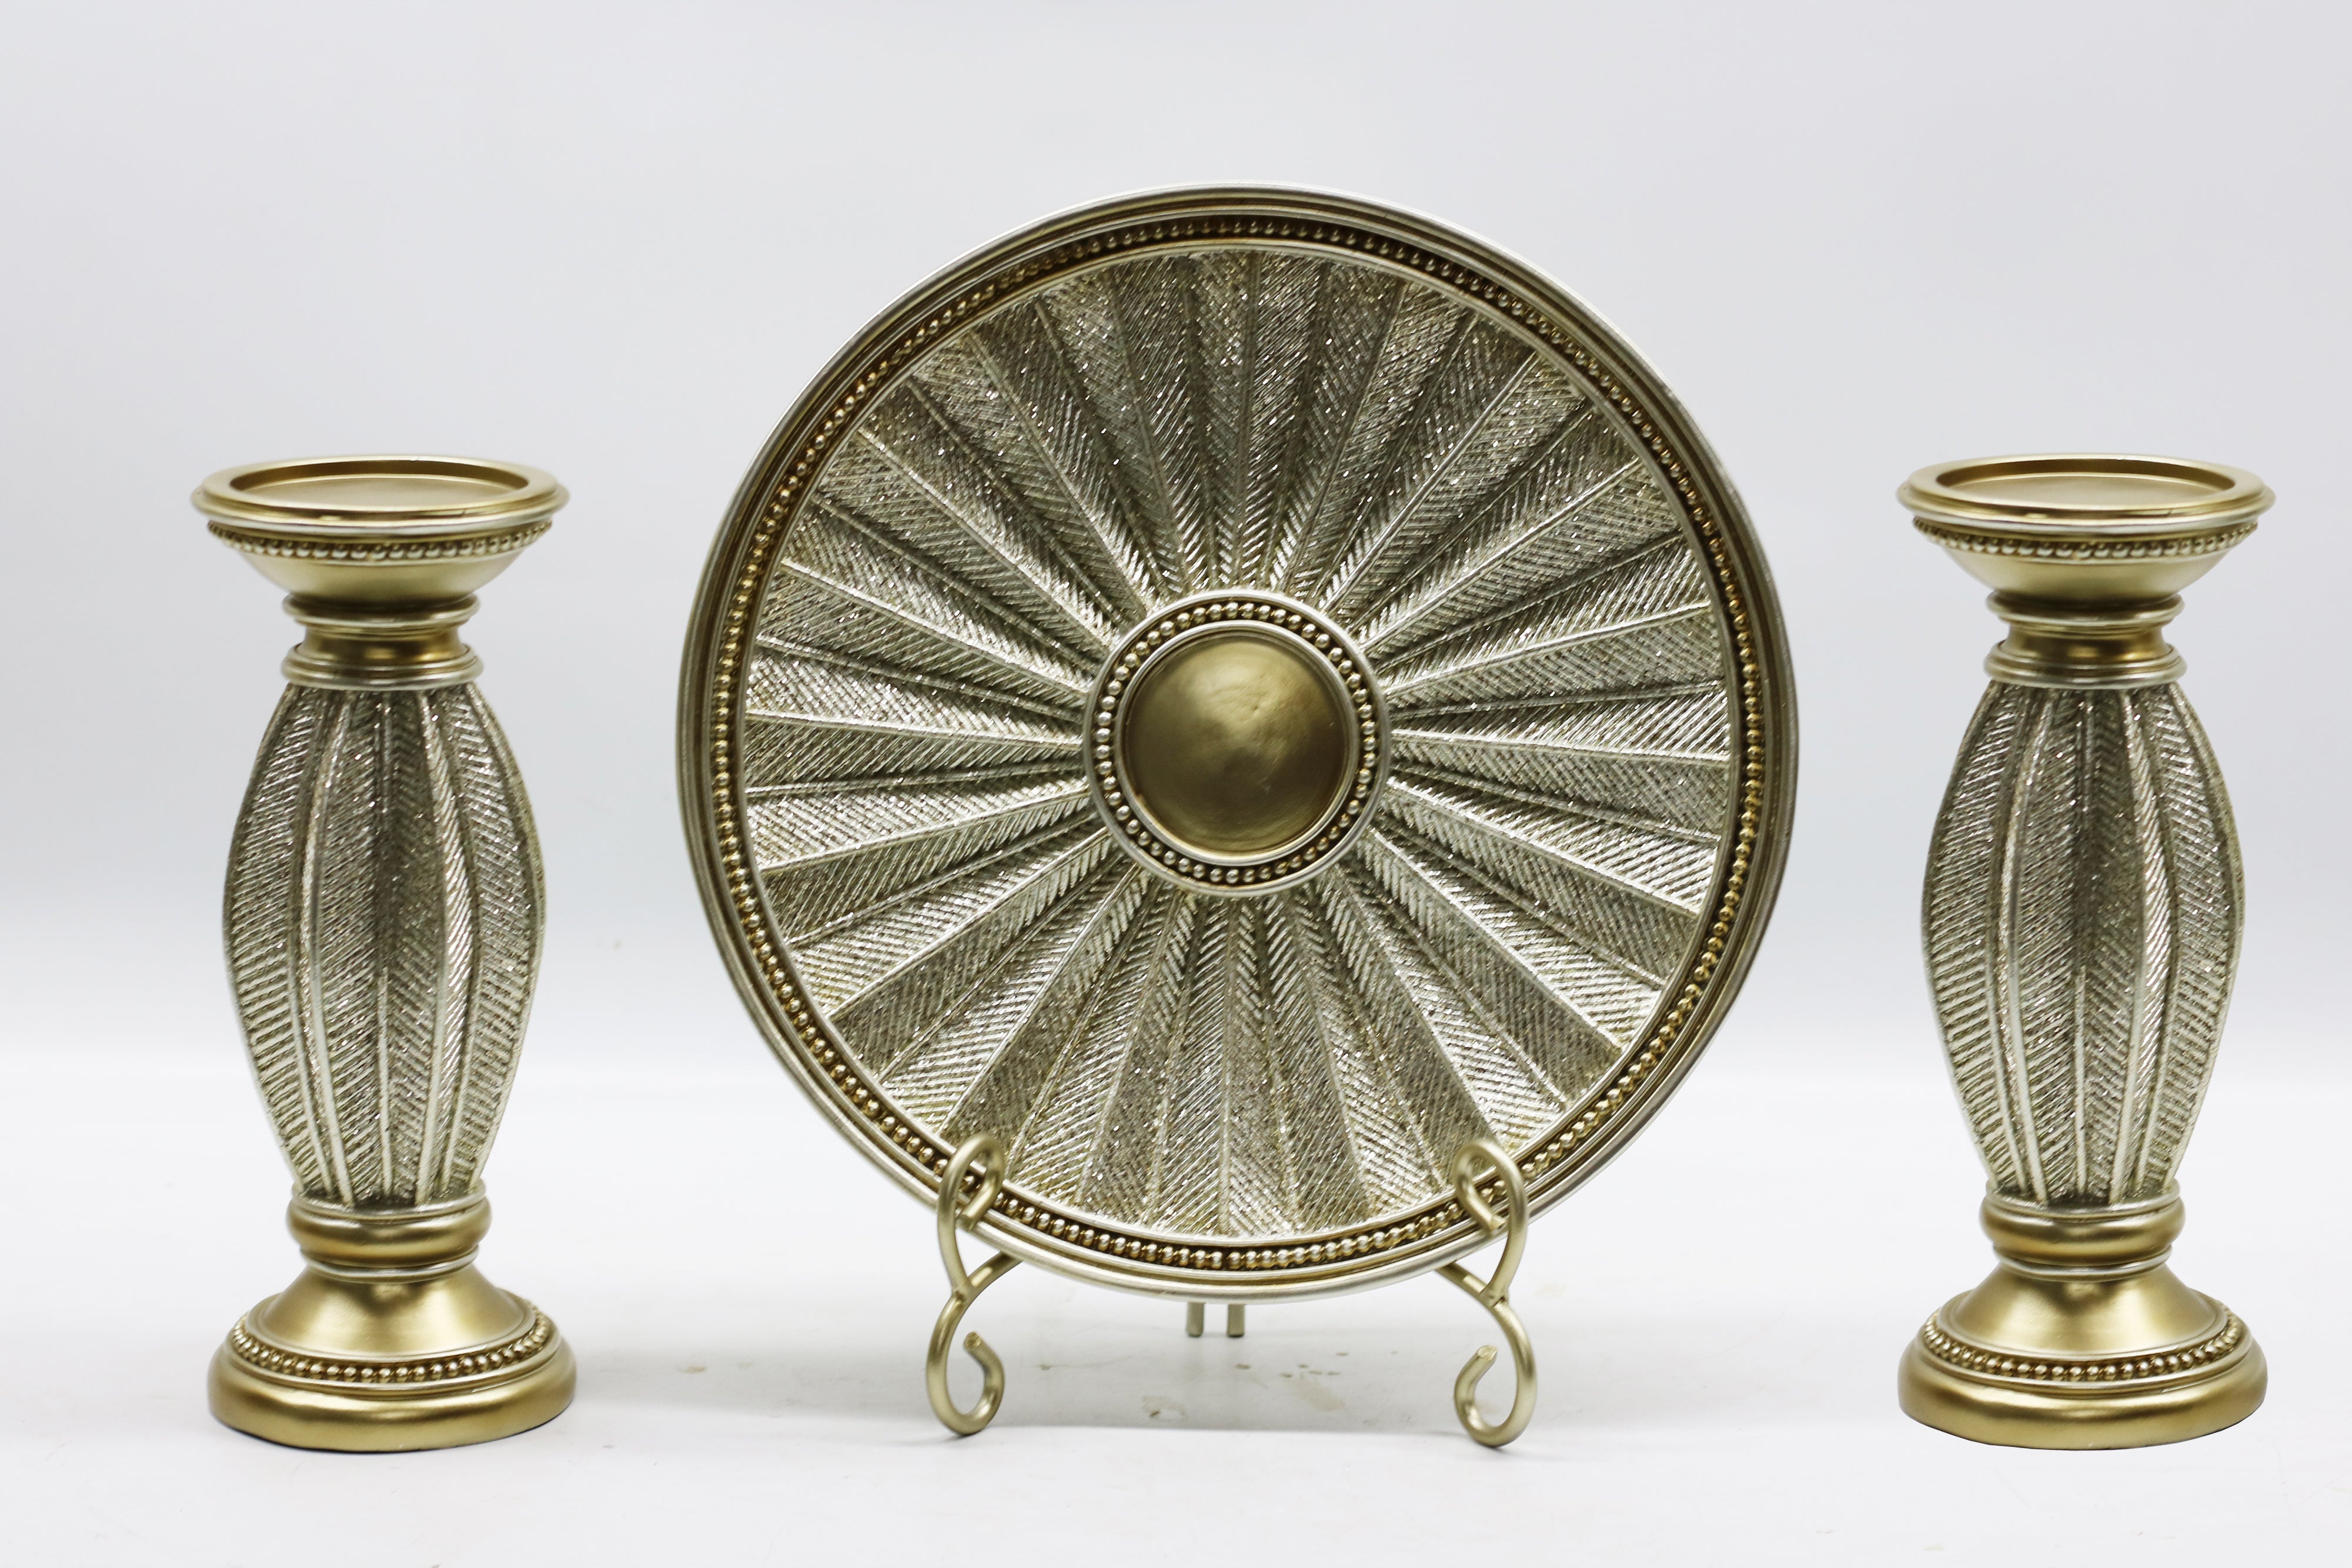 Decorative Plate with Candlesticks